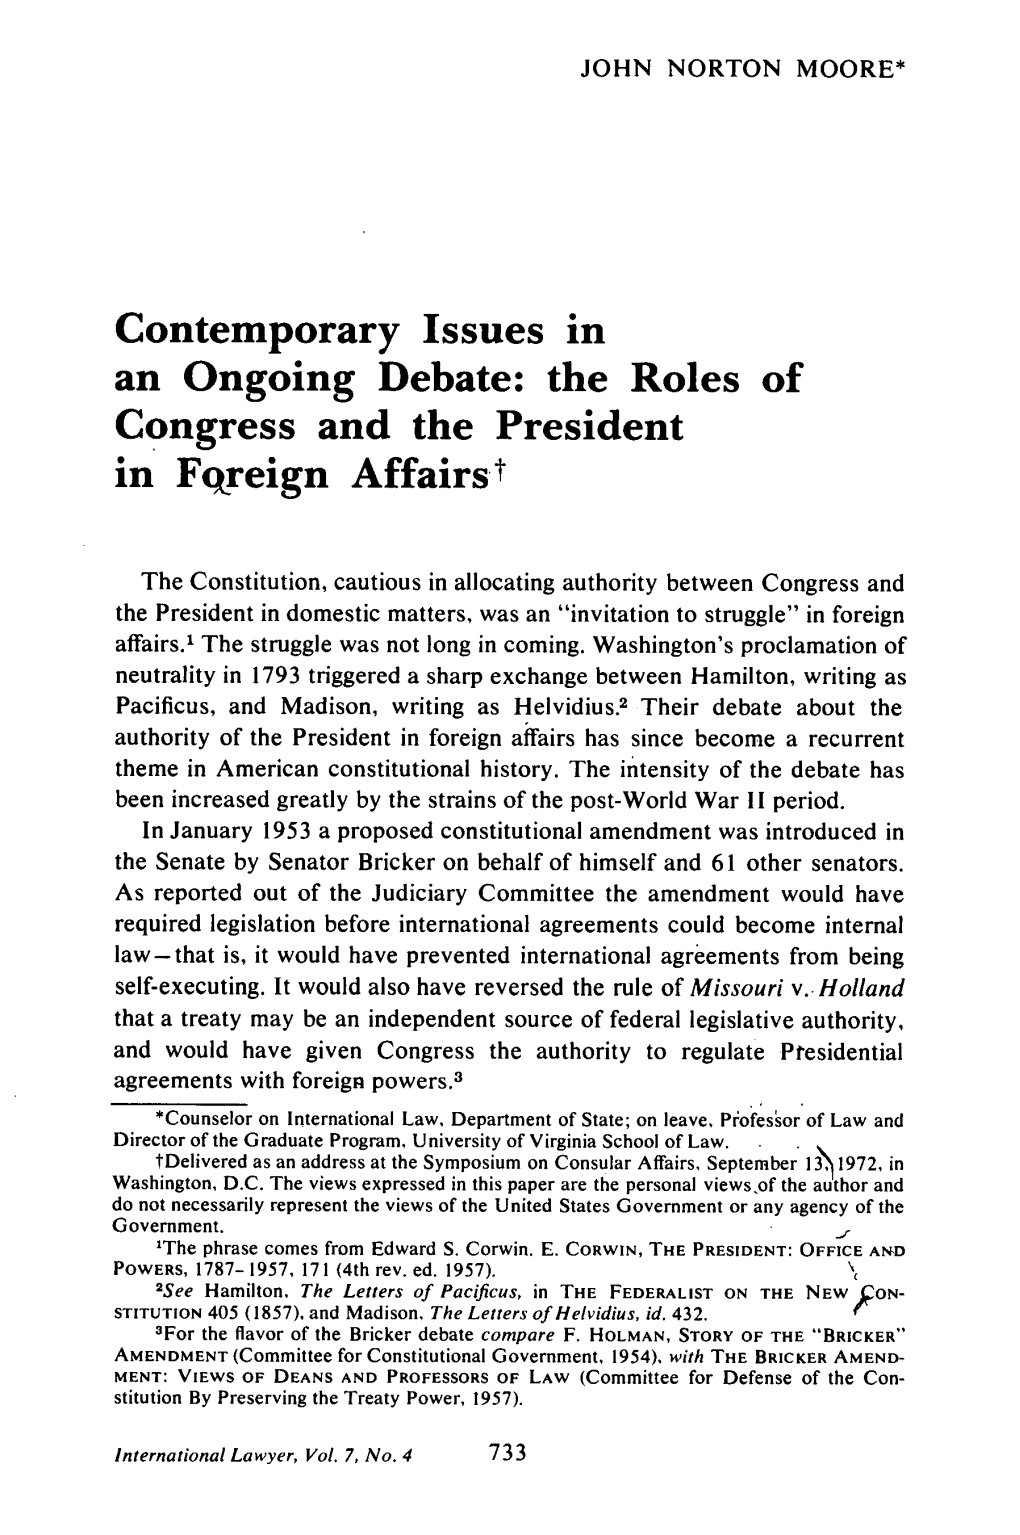 The Roles of Congress and the President in Forgein Affairs